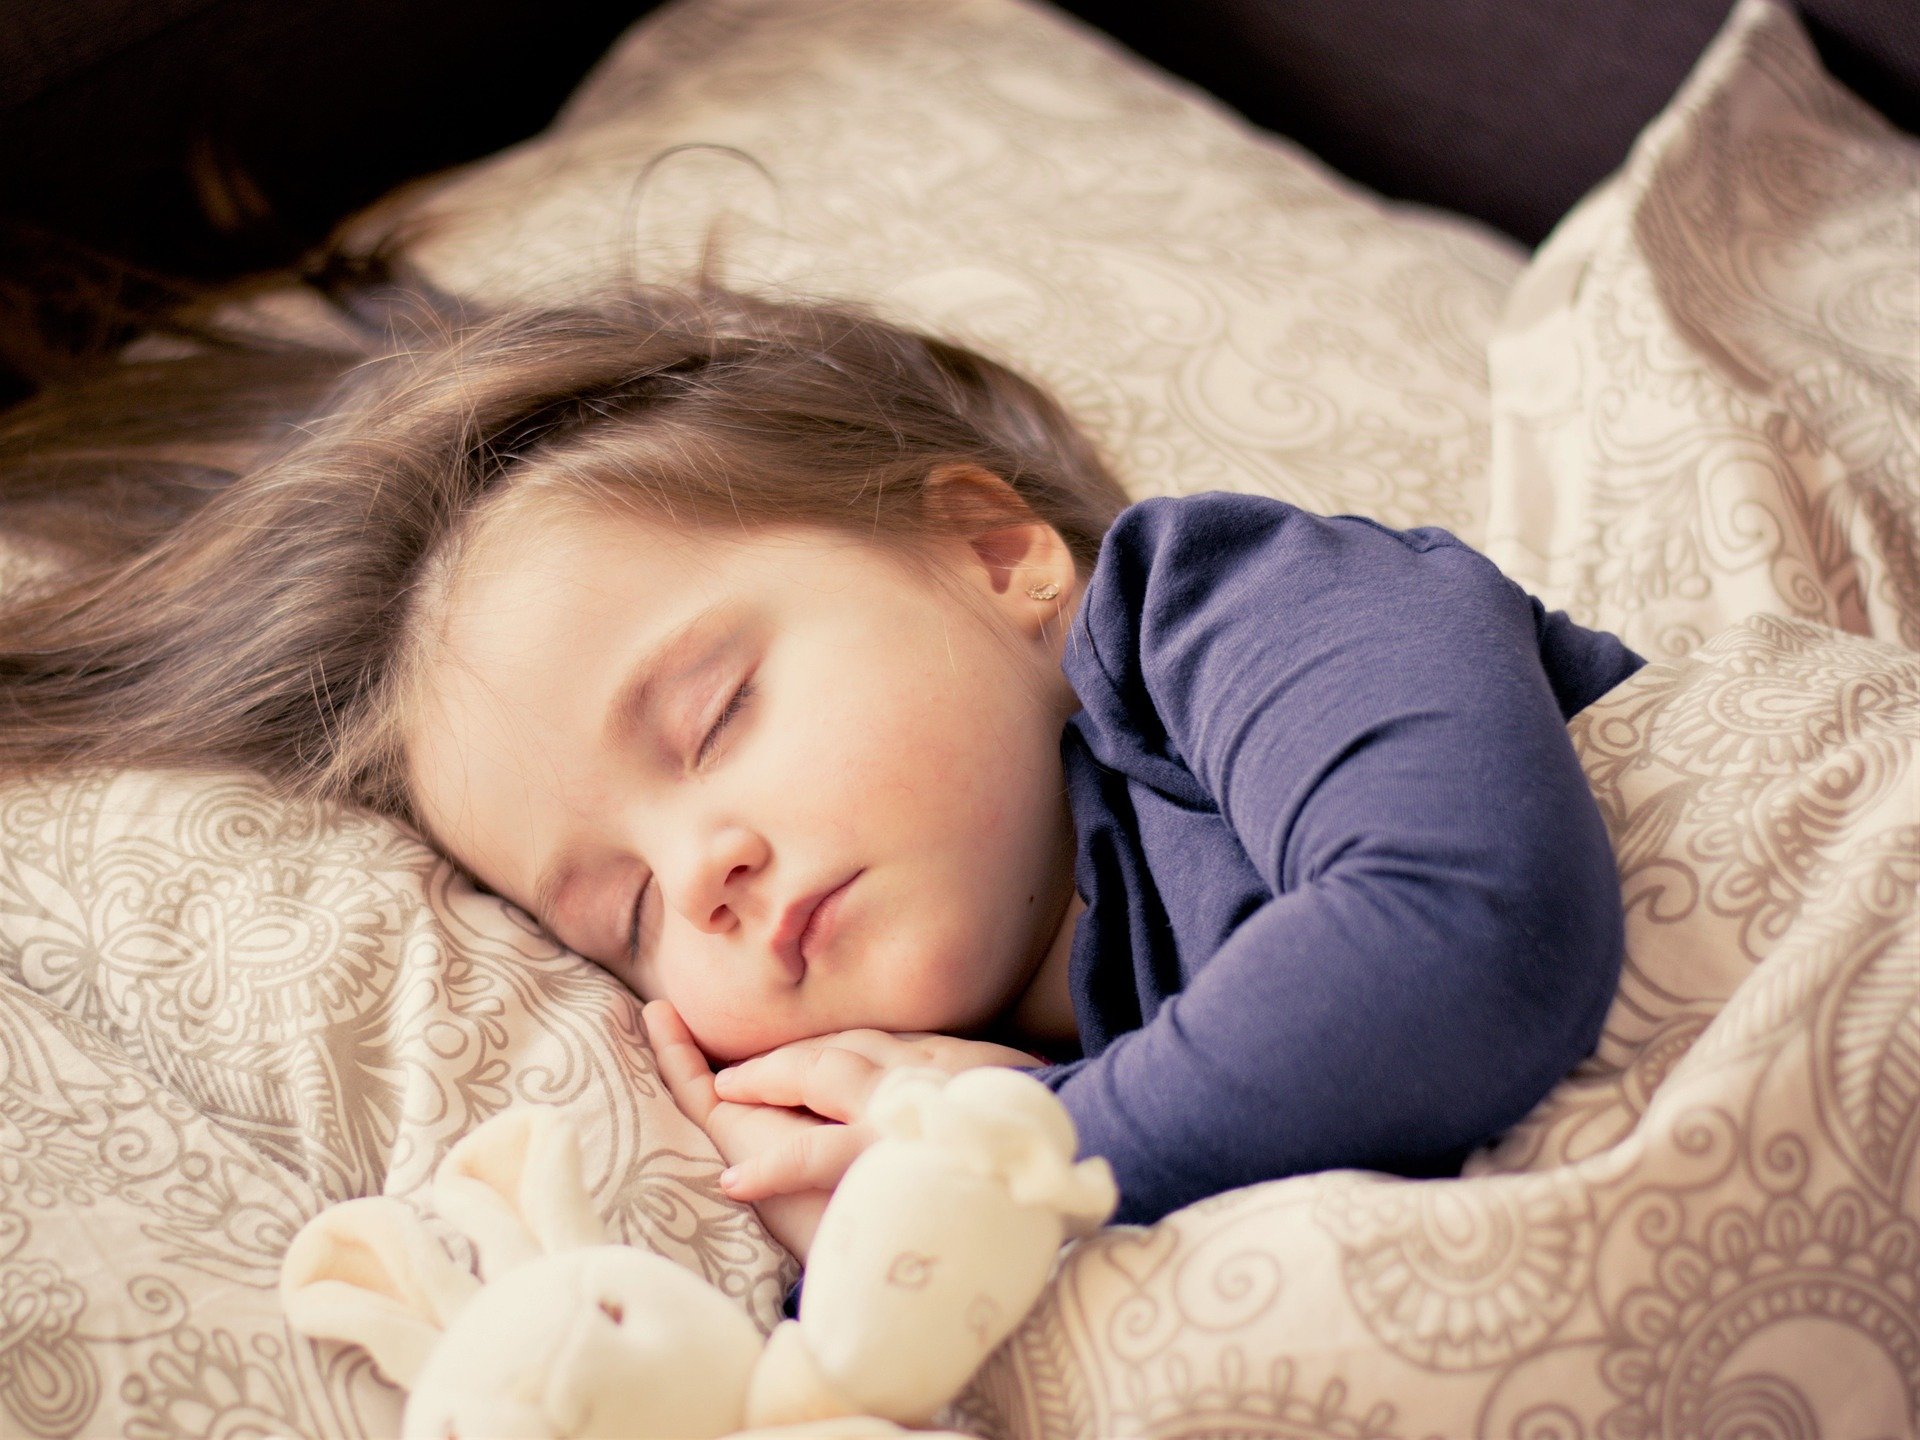 How you help a child go to sleep is related to their behavioral development, finds new study